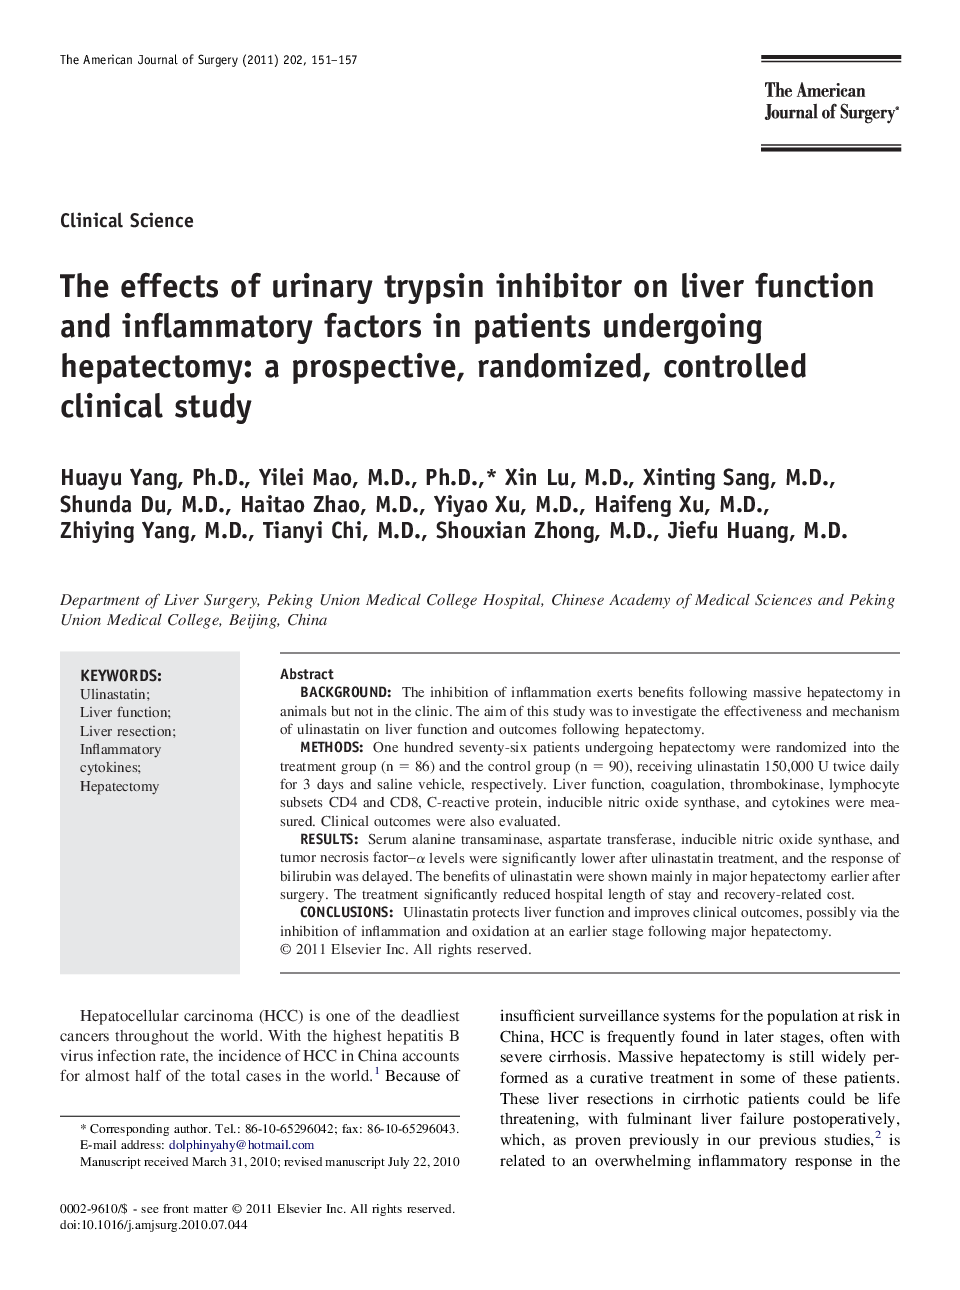 The effects of urinary trypsin inhibitor on liver function and inflammatory factors in patients undergoing hepatectomy: a prospective, randomized, controlled clinical study